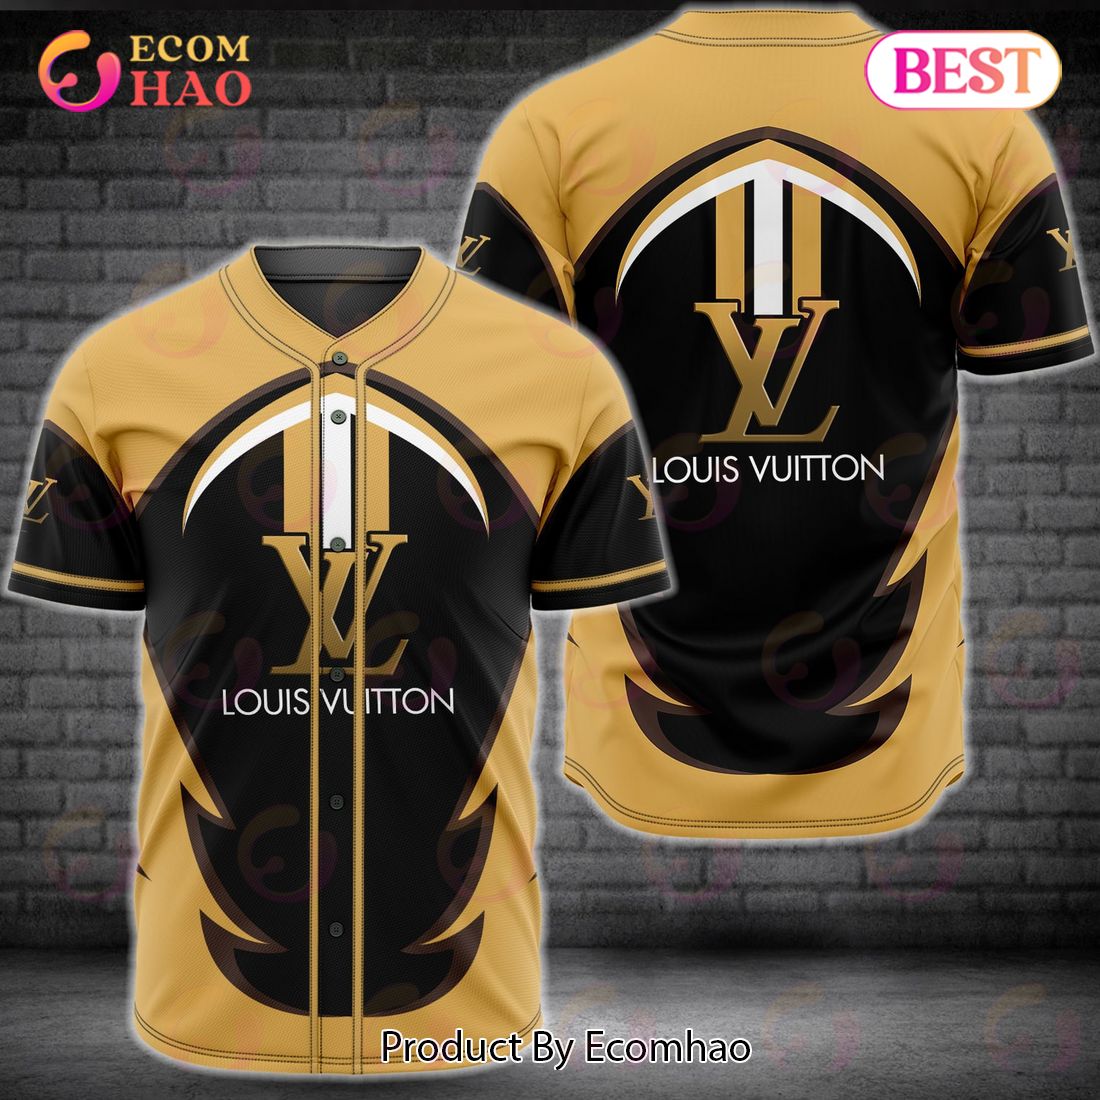 Louis Vuitton Gold Mix Black Luxury Brand Jersey Limited Edition